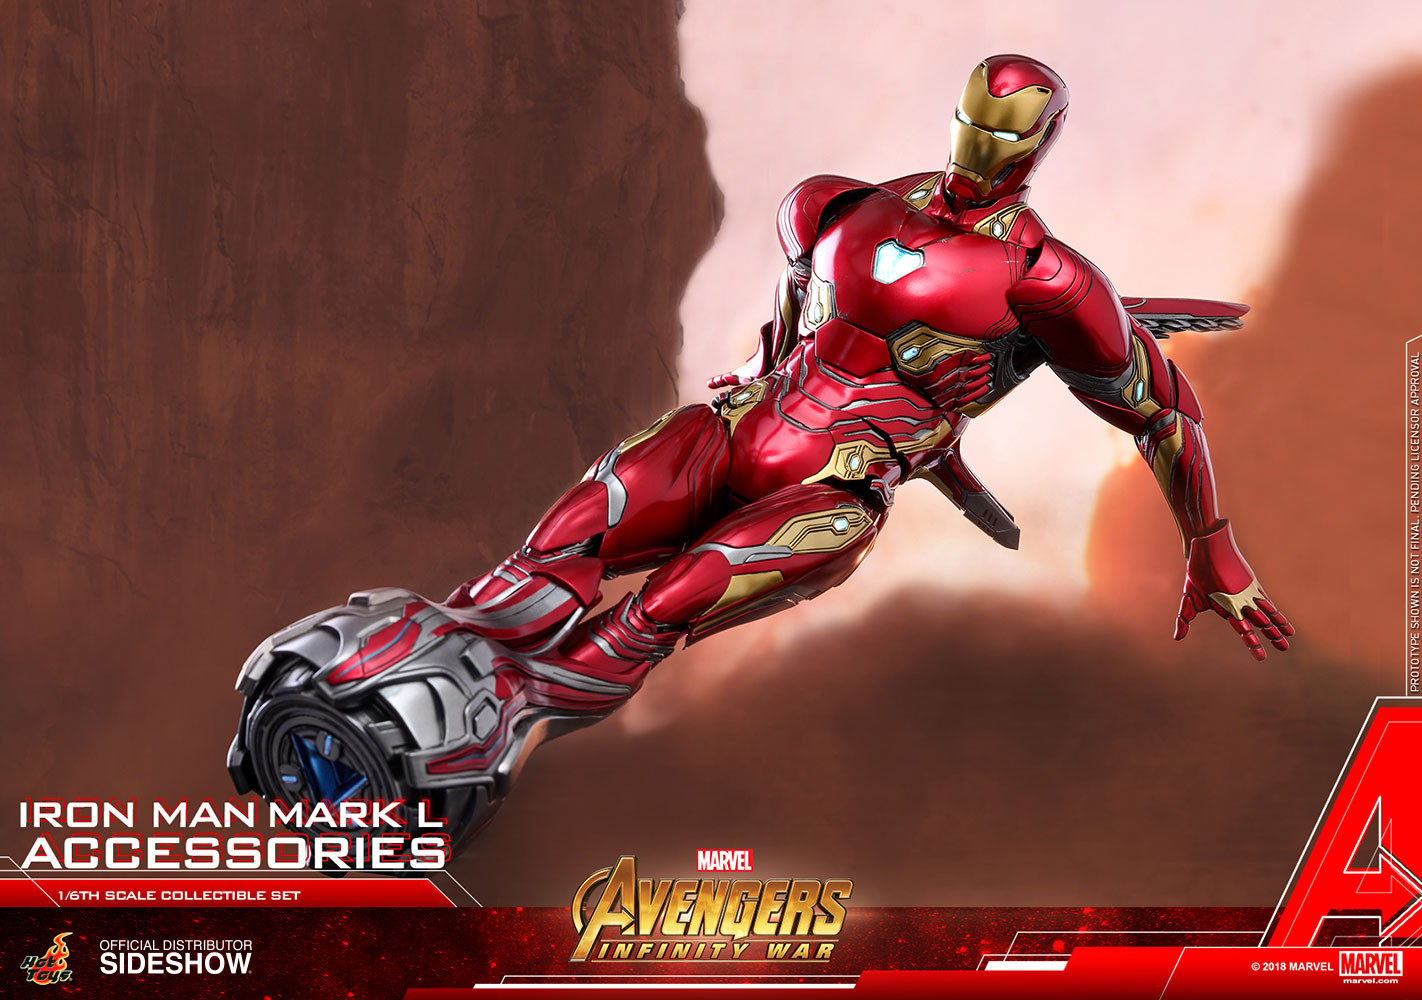 Iron Man Mark L Accessories Special Edition